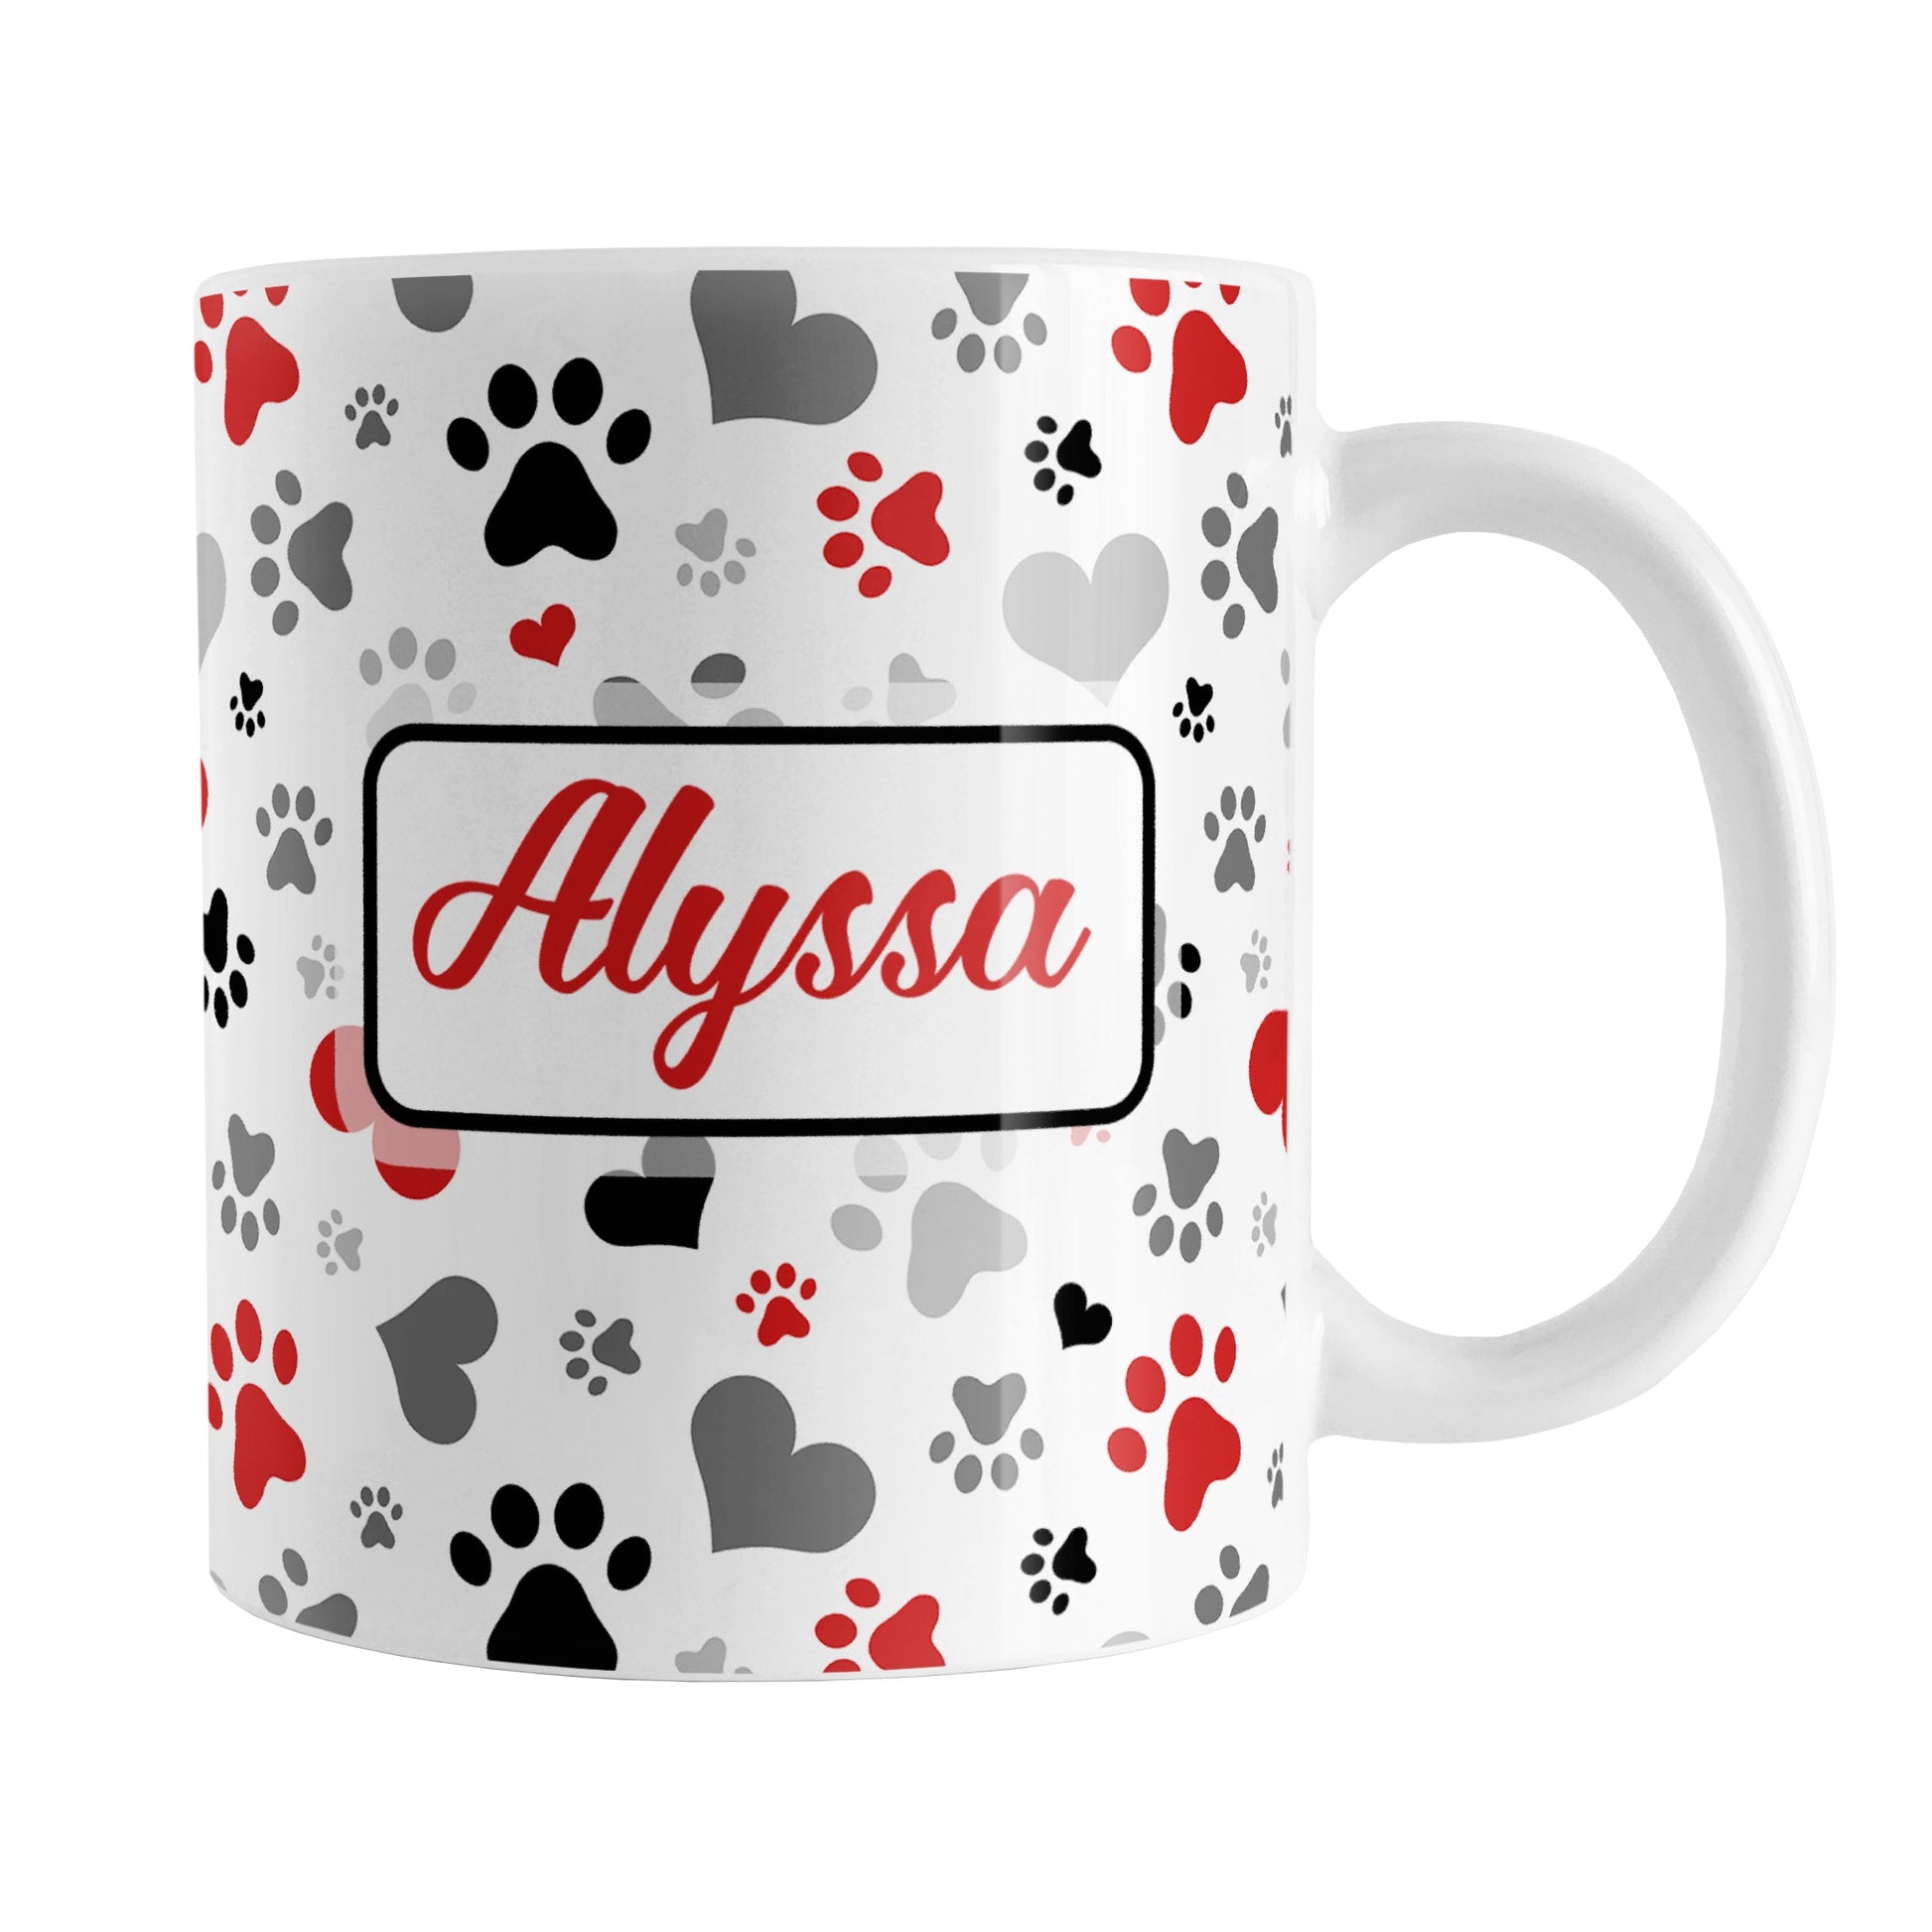 Personalized Black and Red Hearts and Paw Prints Mug (11oz) at Amy's Coffee Mugs. A ceramic coffee mug designed with a pattern of hearts and paw prints in red, black, and gray that wraps around the mug to the handle. Your name is custom printed in a red script font in a white rectangle on both sides of the mug over the paw prints pattern.